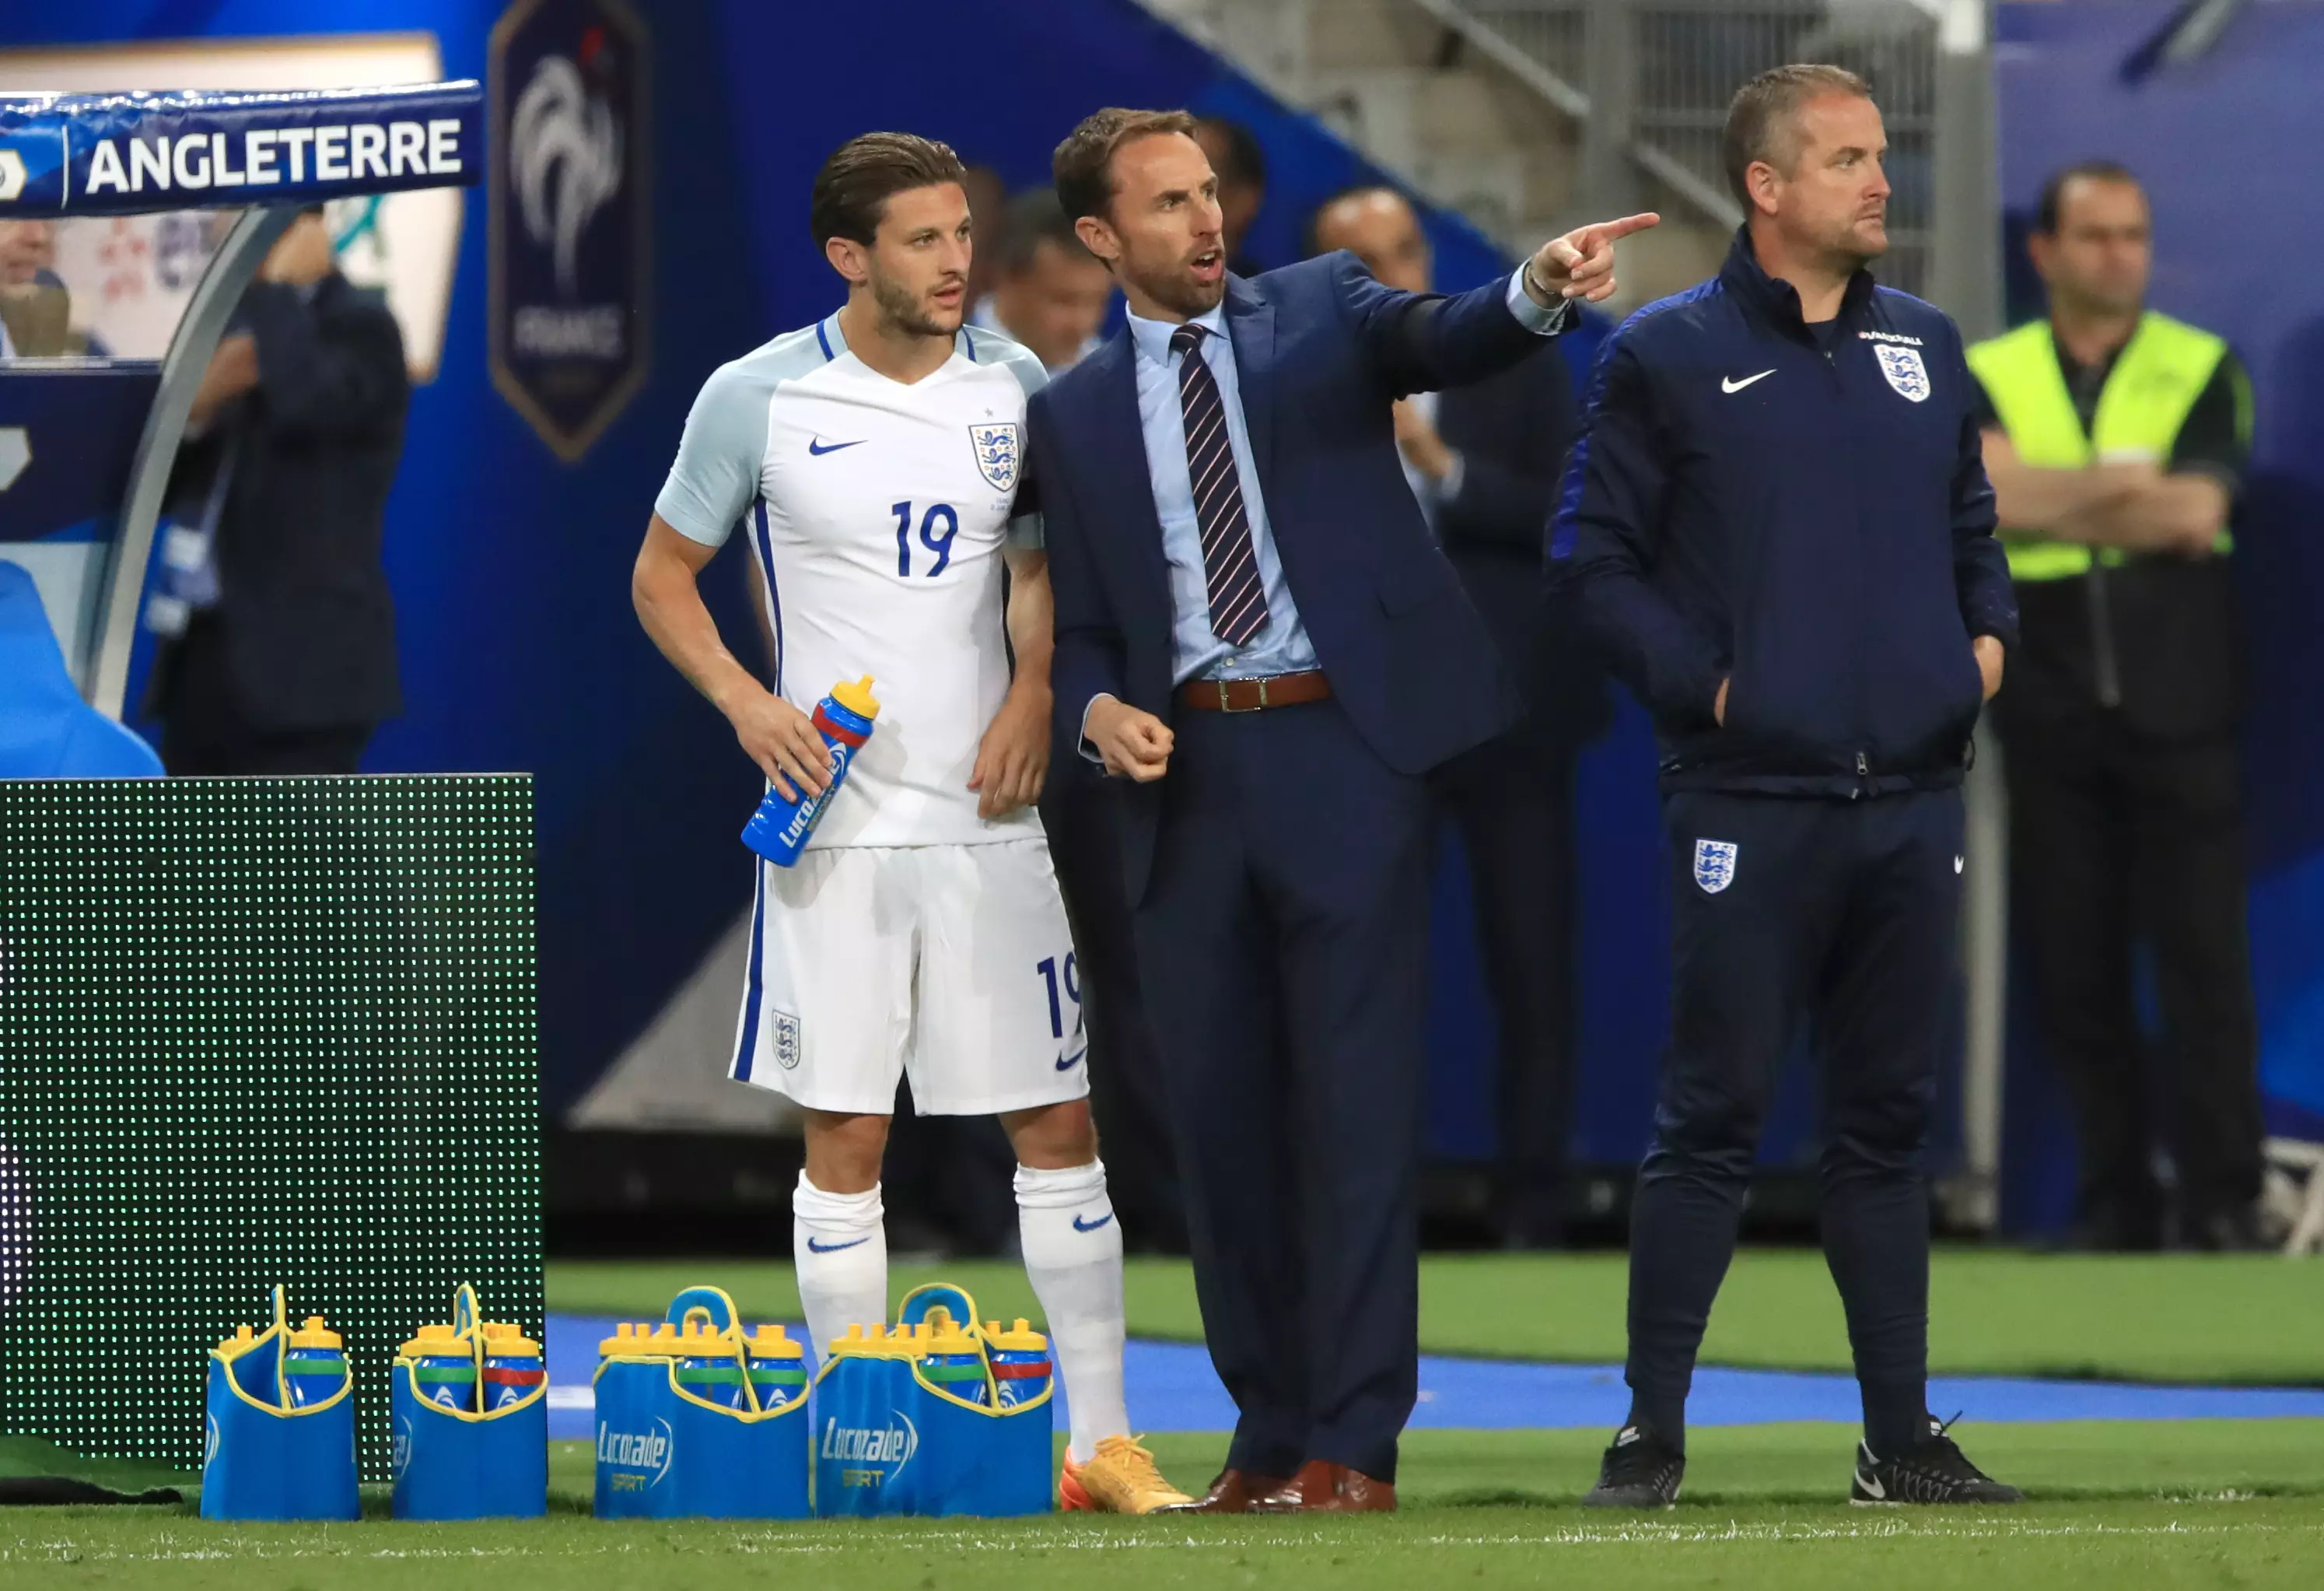 Lallana will be hoping to get back into England reckoning. Image: PA Images.